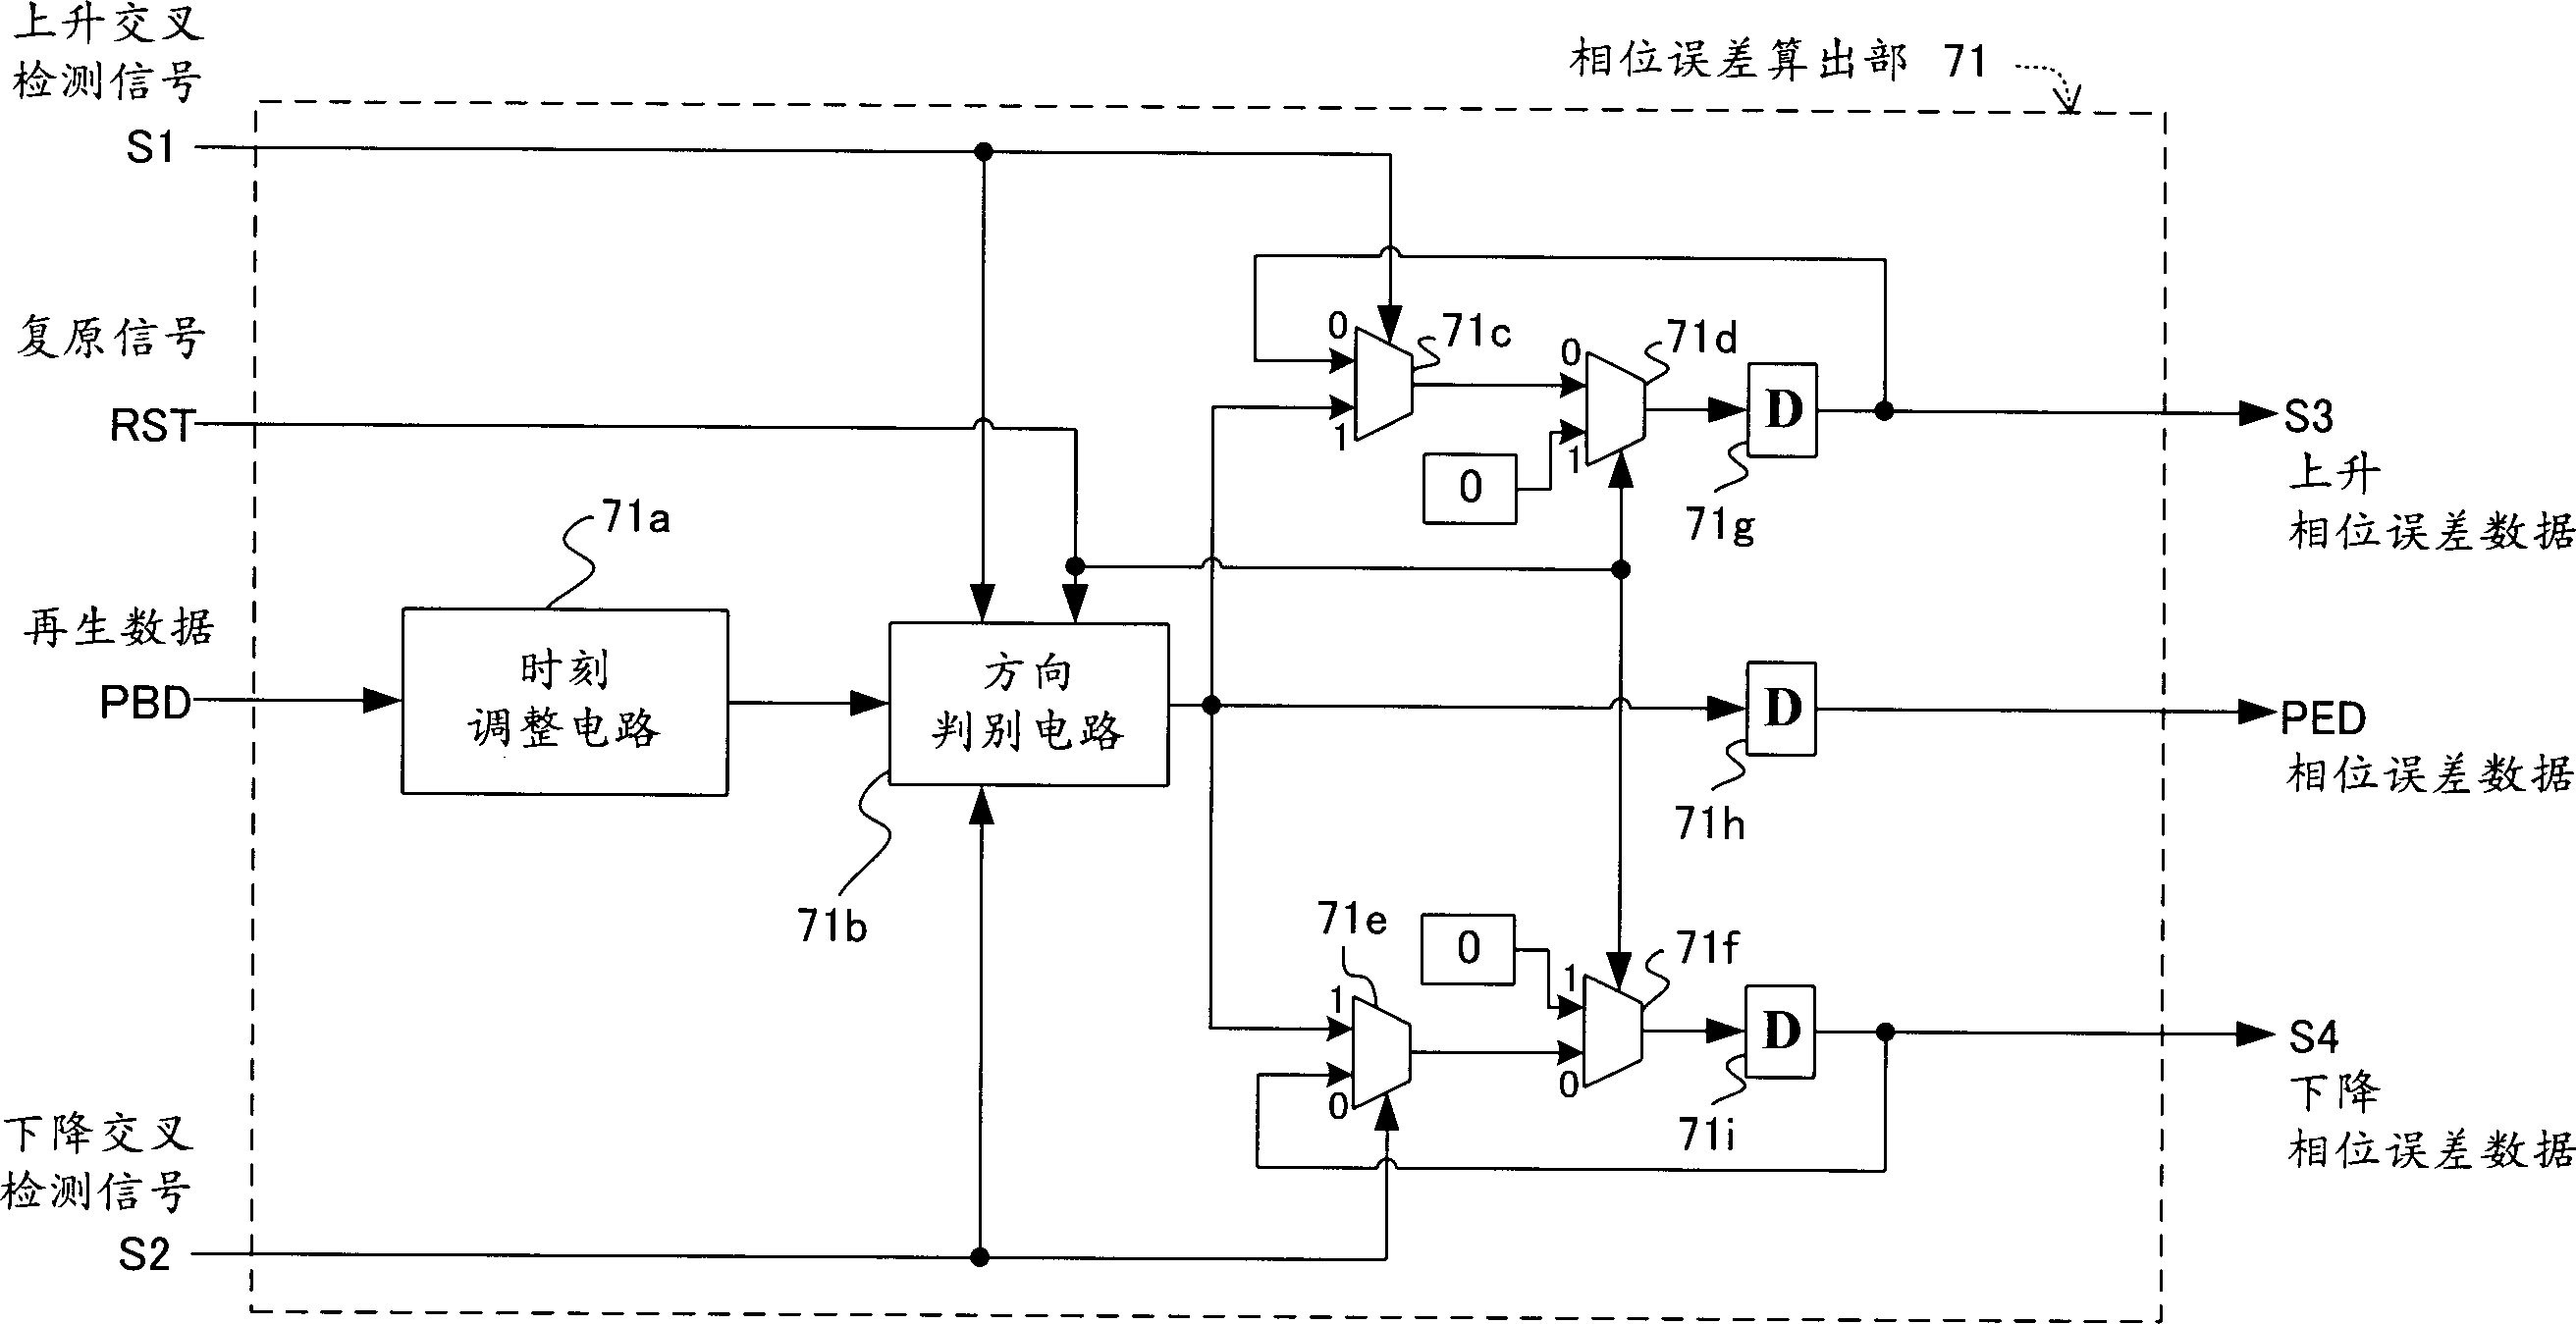 Phase error detection circuit and synchronization clock extraction circuit